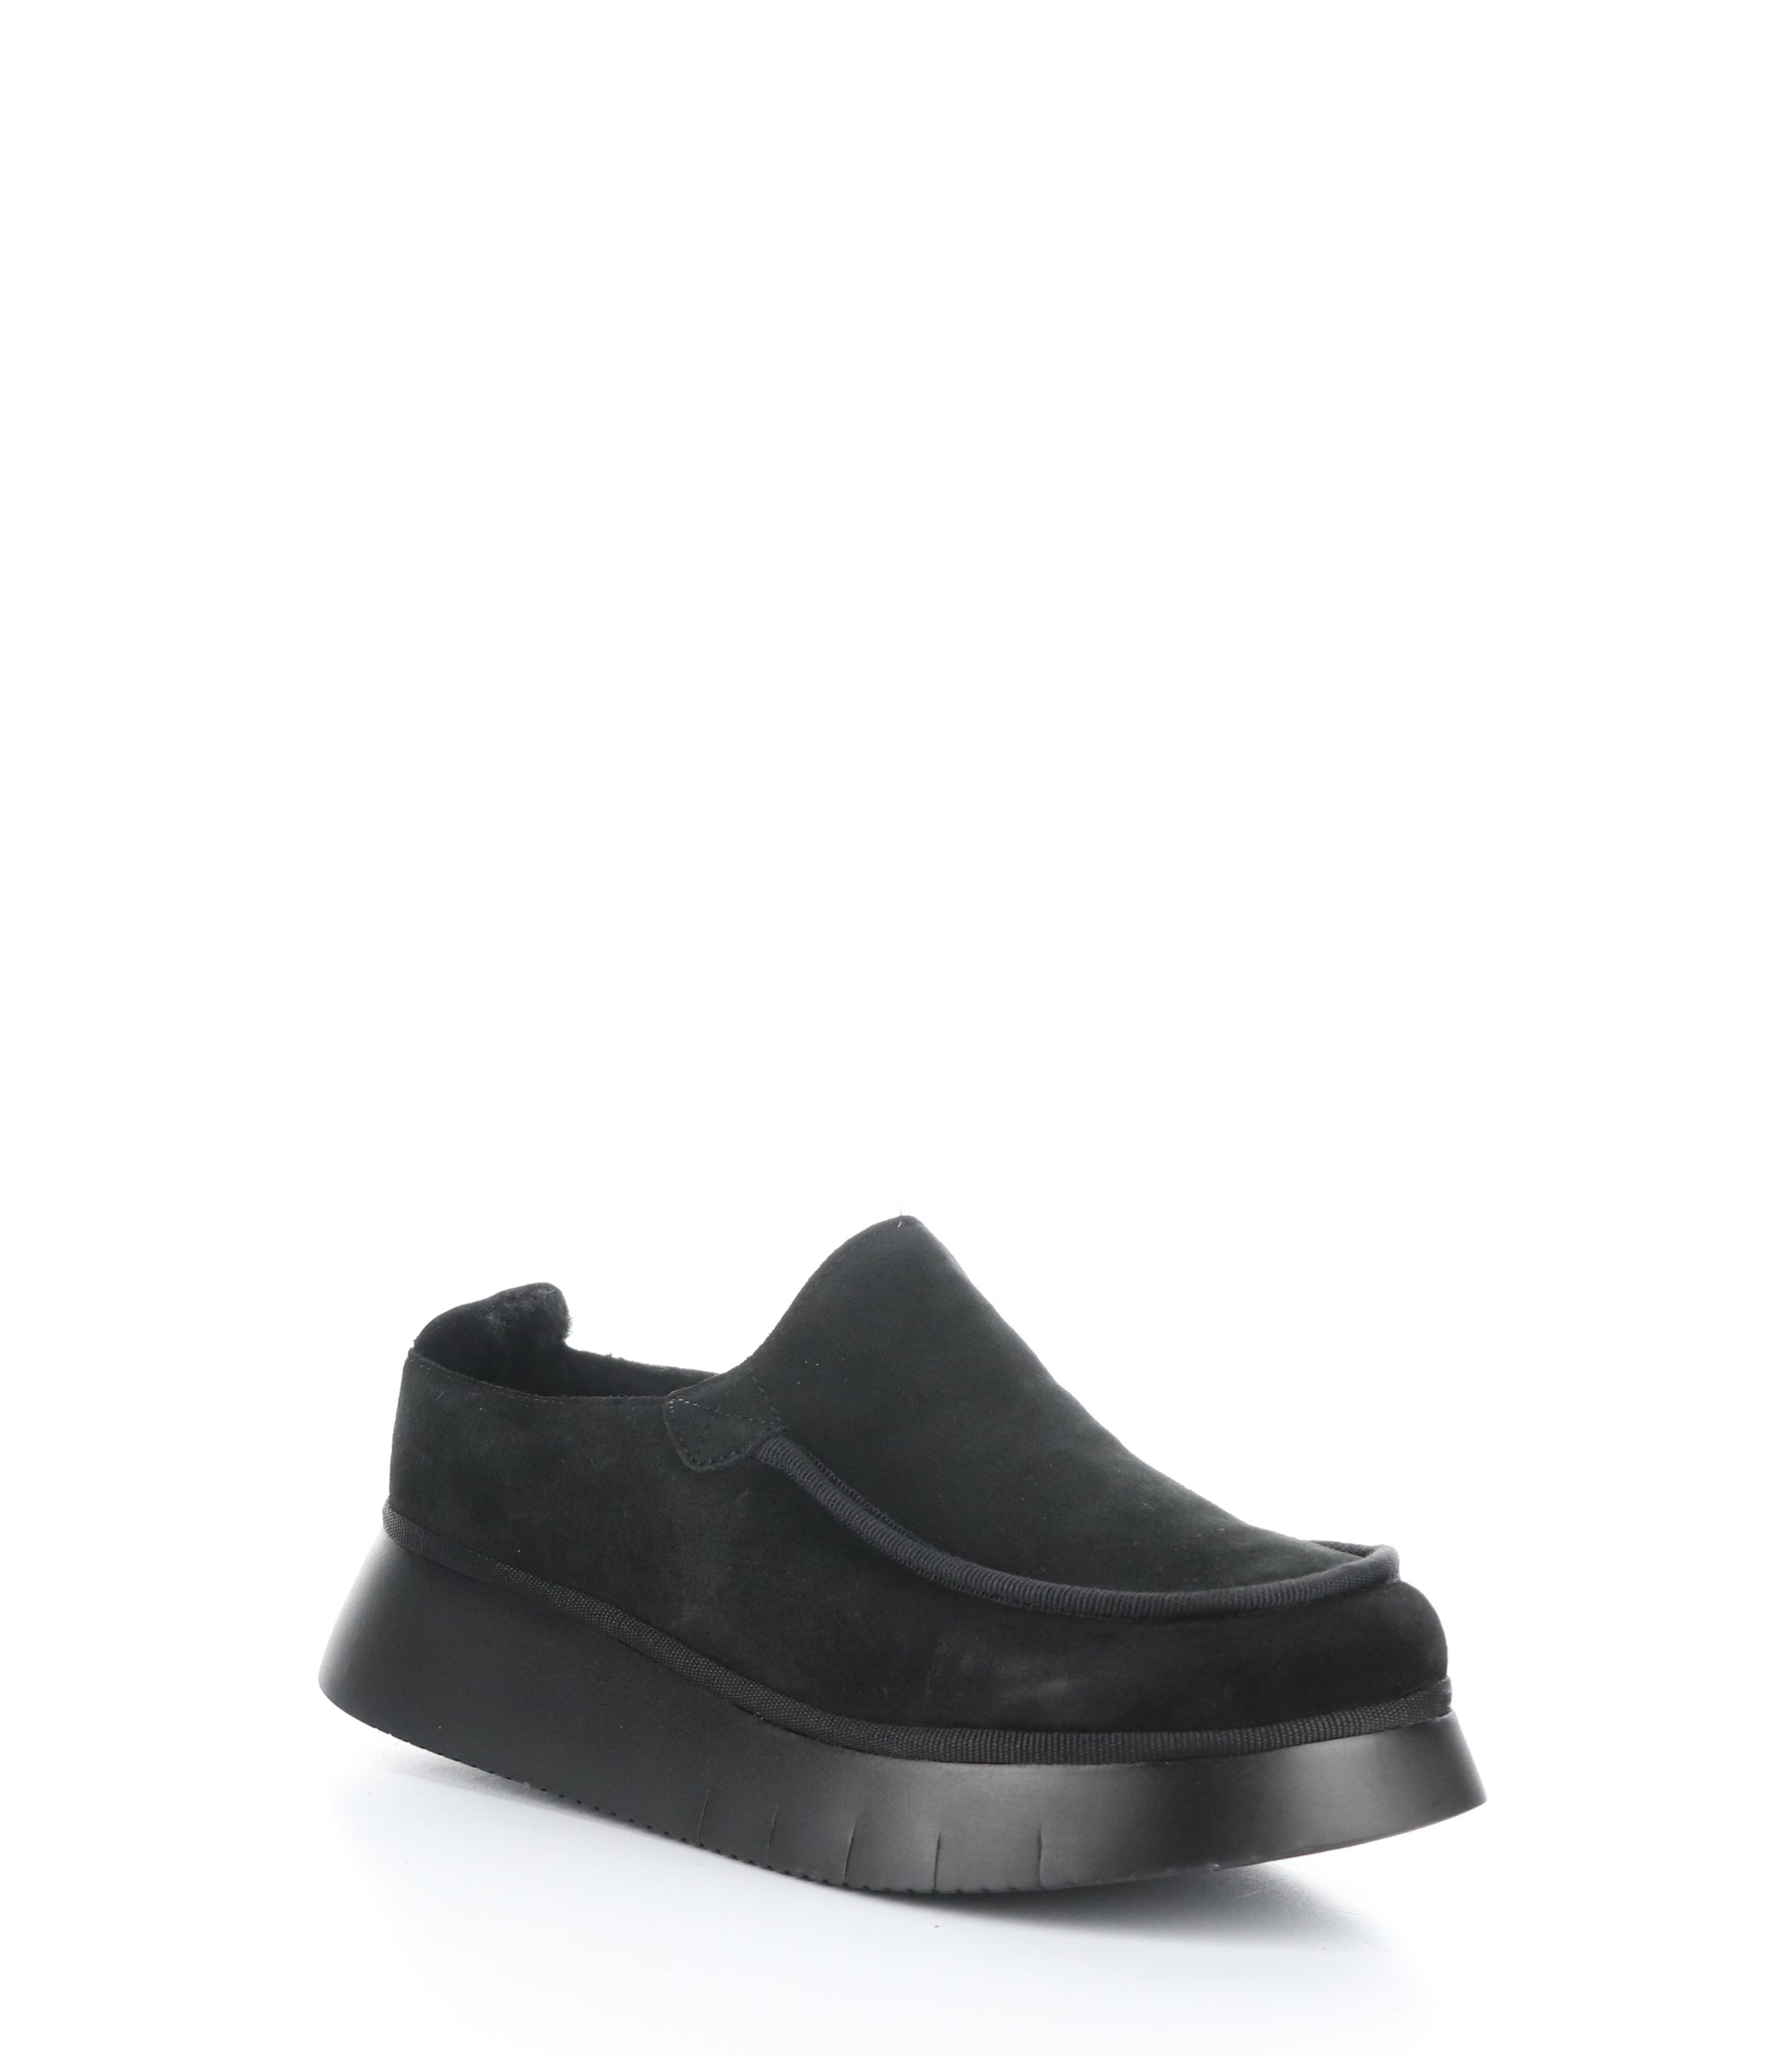 Right Angle profile view of a black suede slip on Shoe.